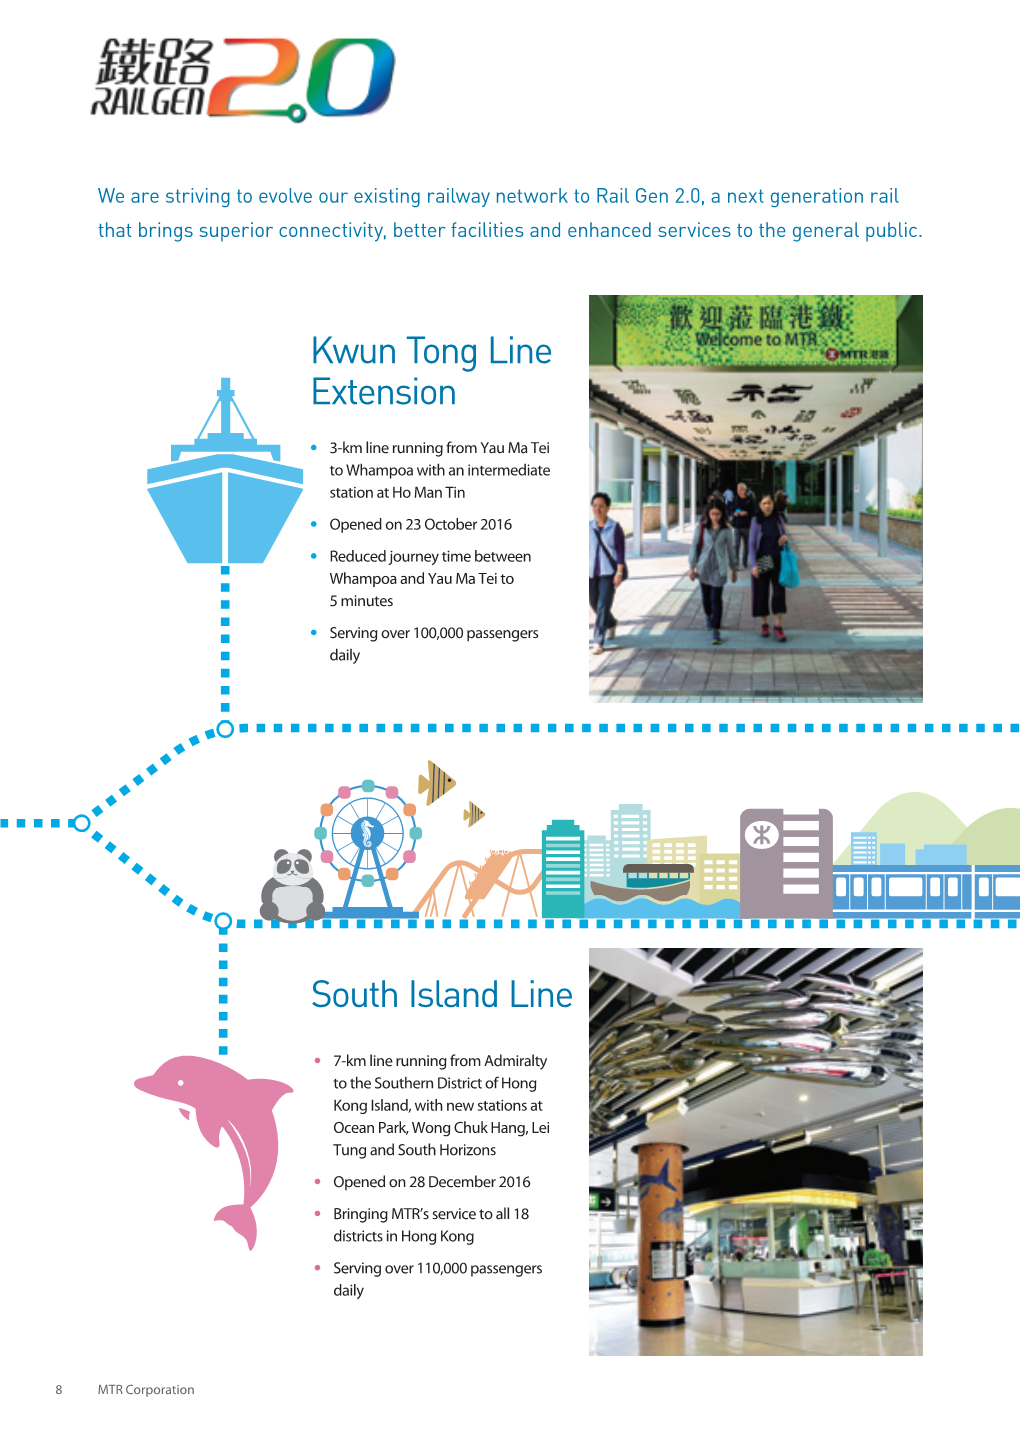 South Island Line Kwun Tong Line Extension